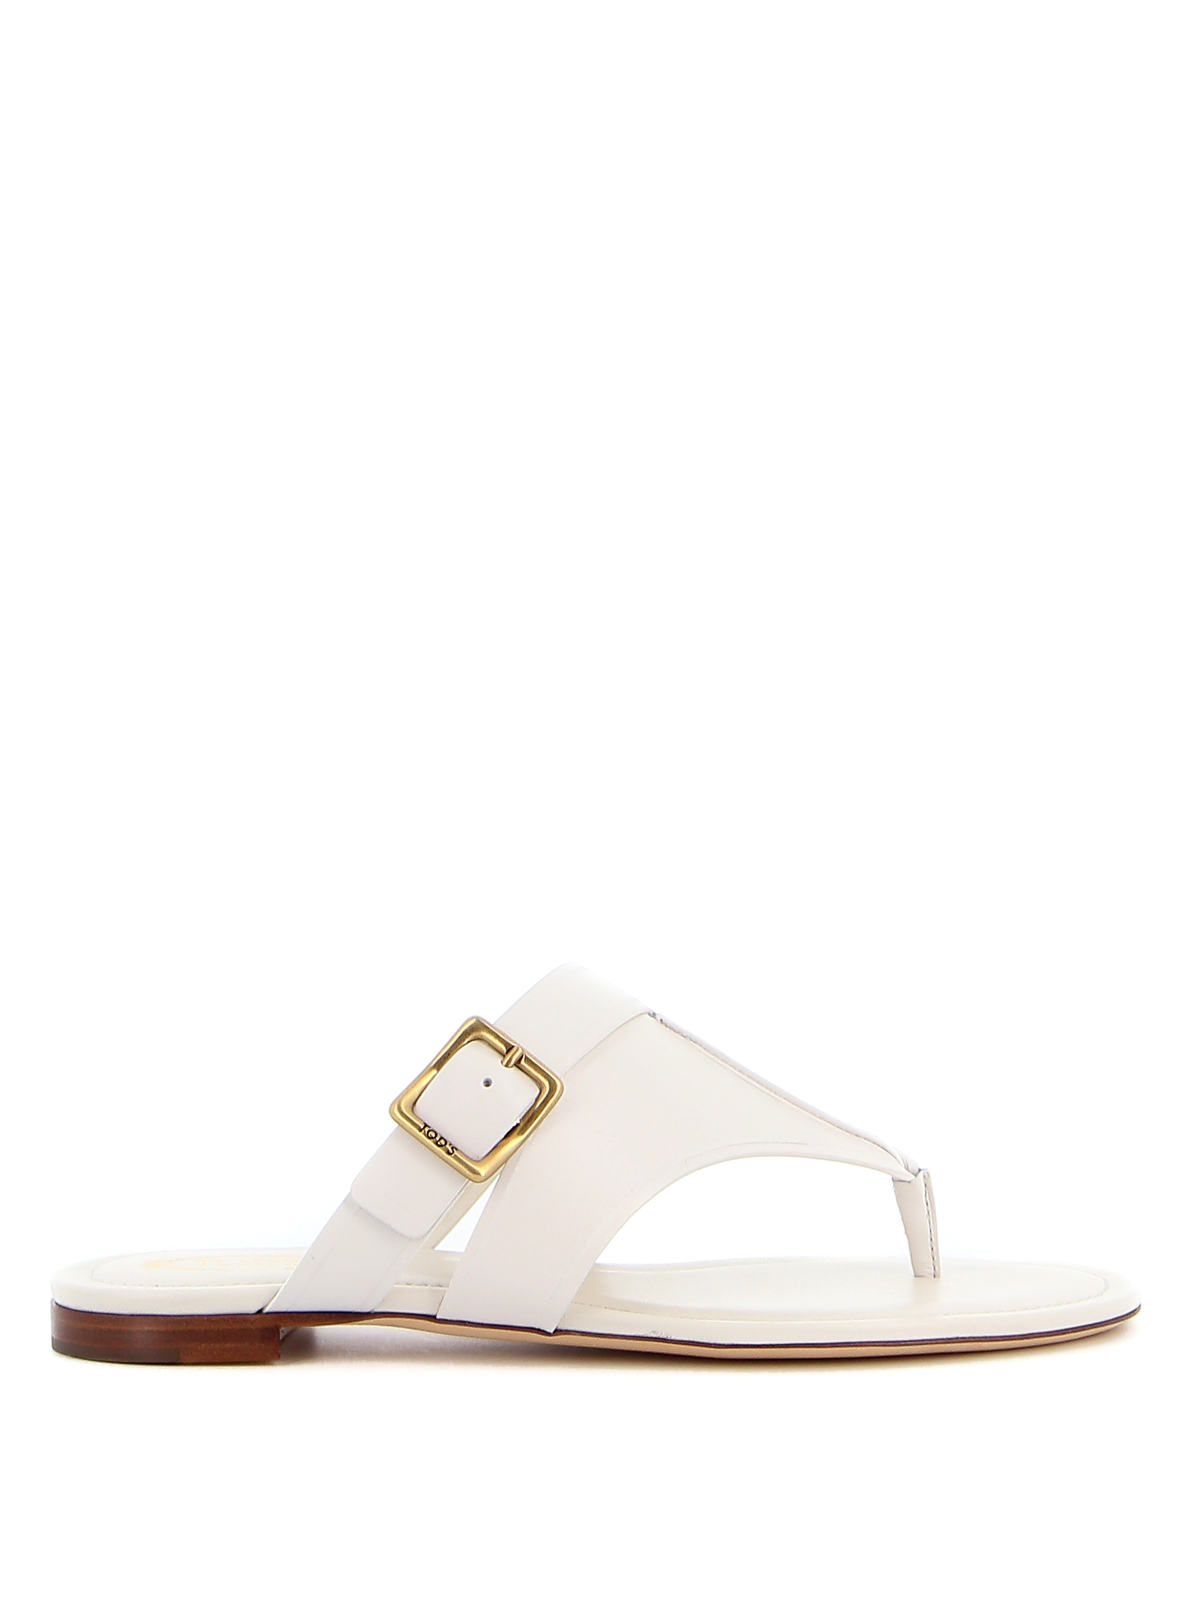 TOD'S WHITE THONG SANDALS